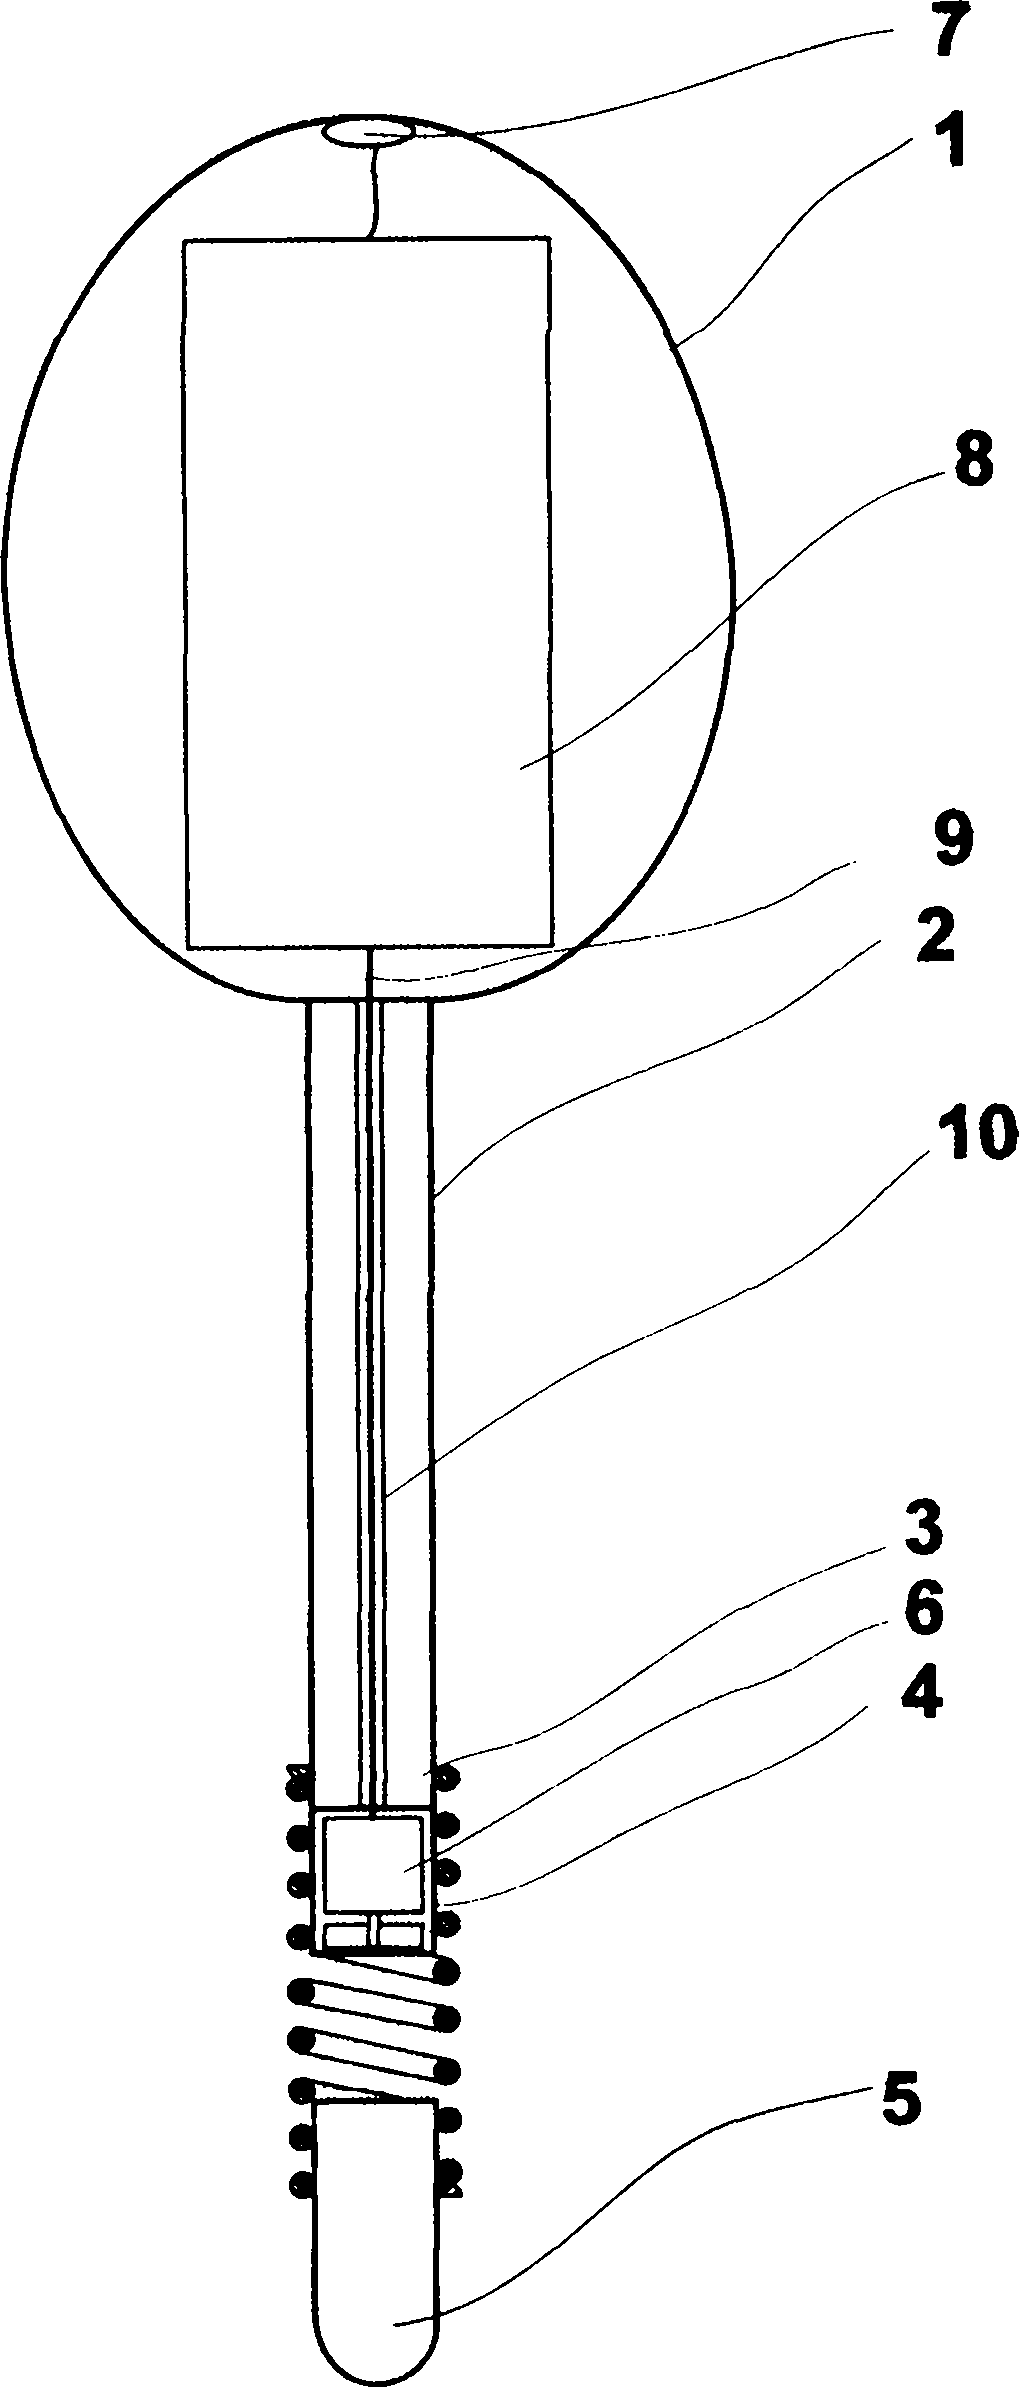 Crushed bone compaction device for bone grafting surgery